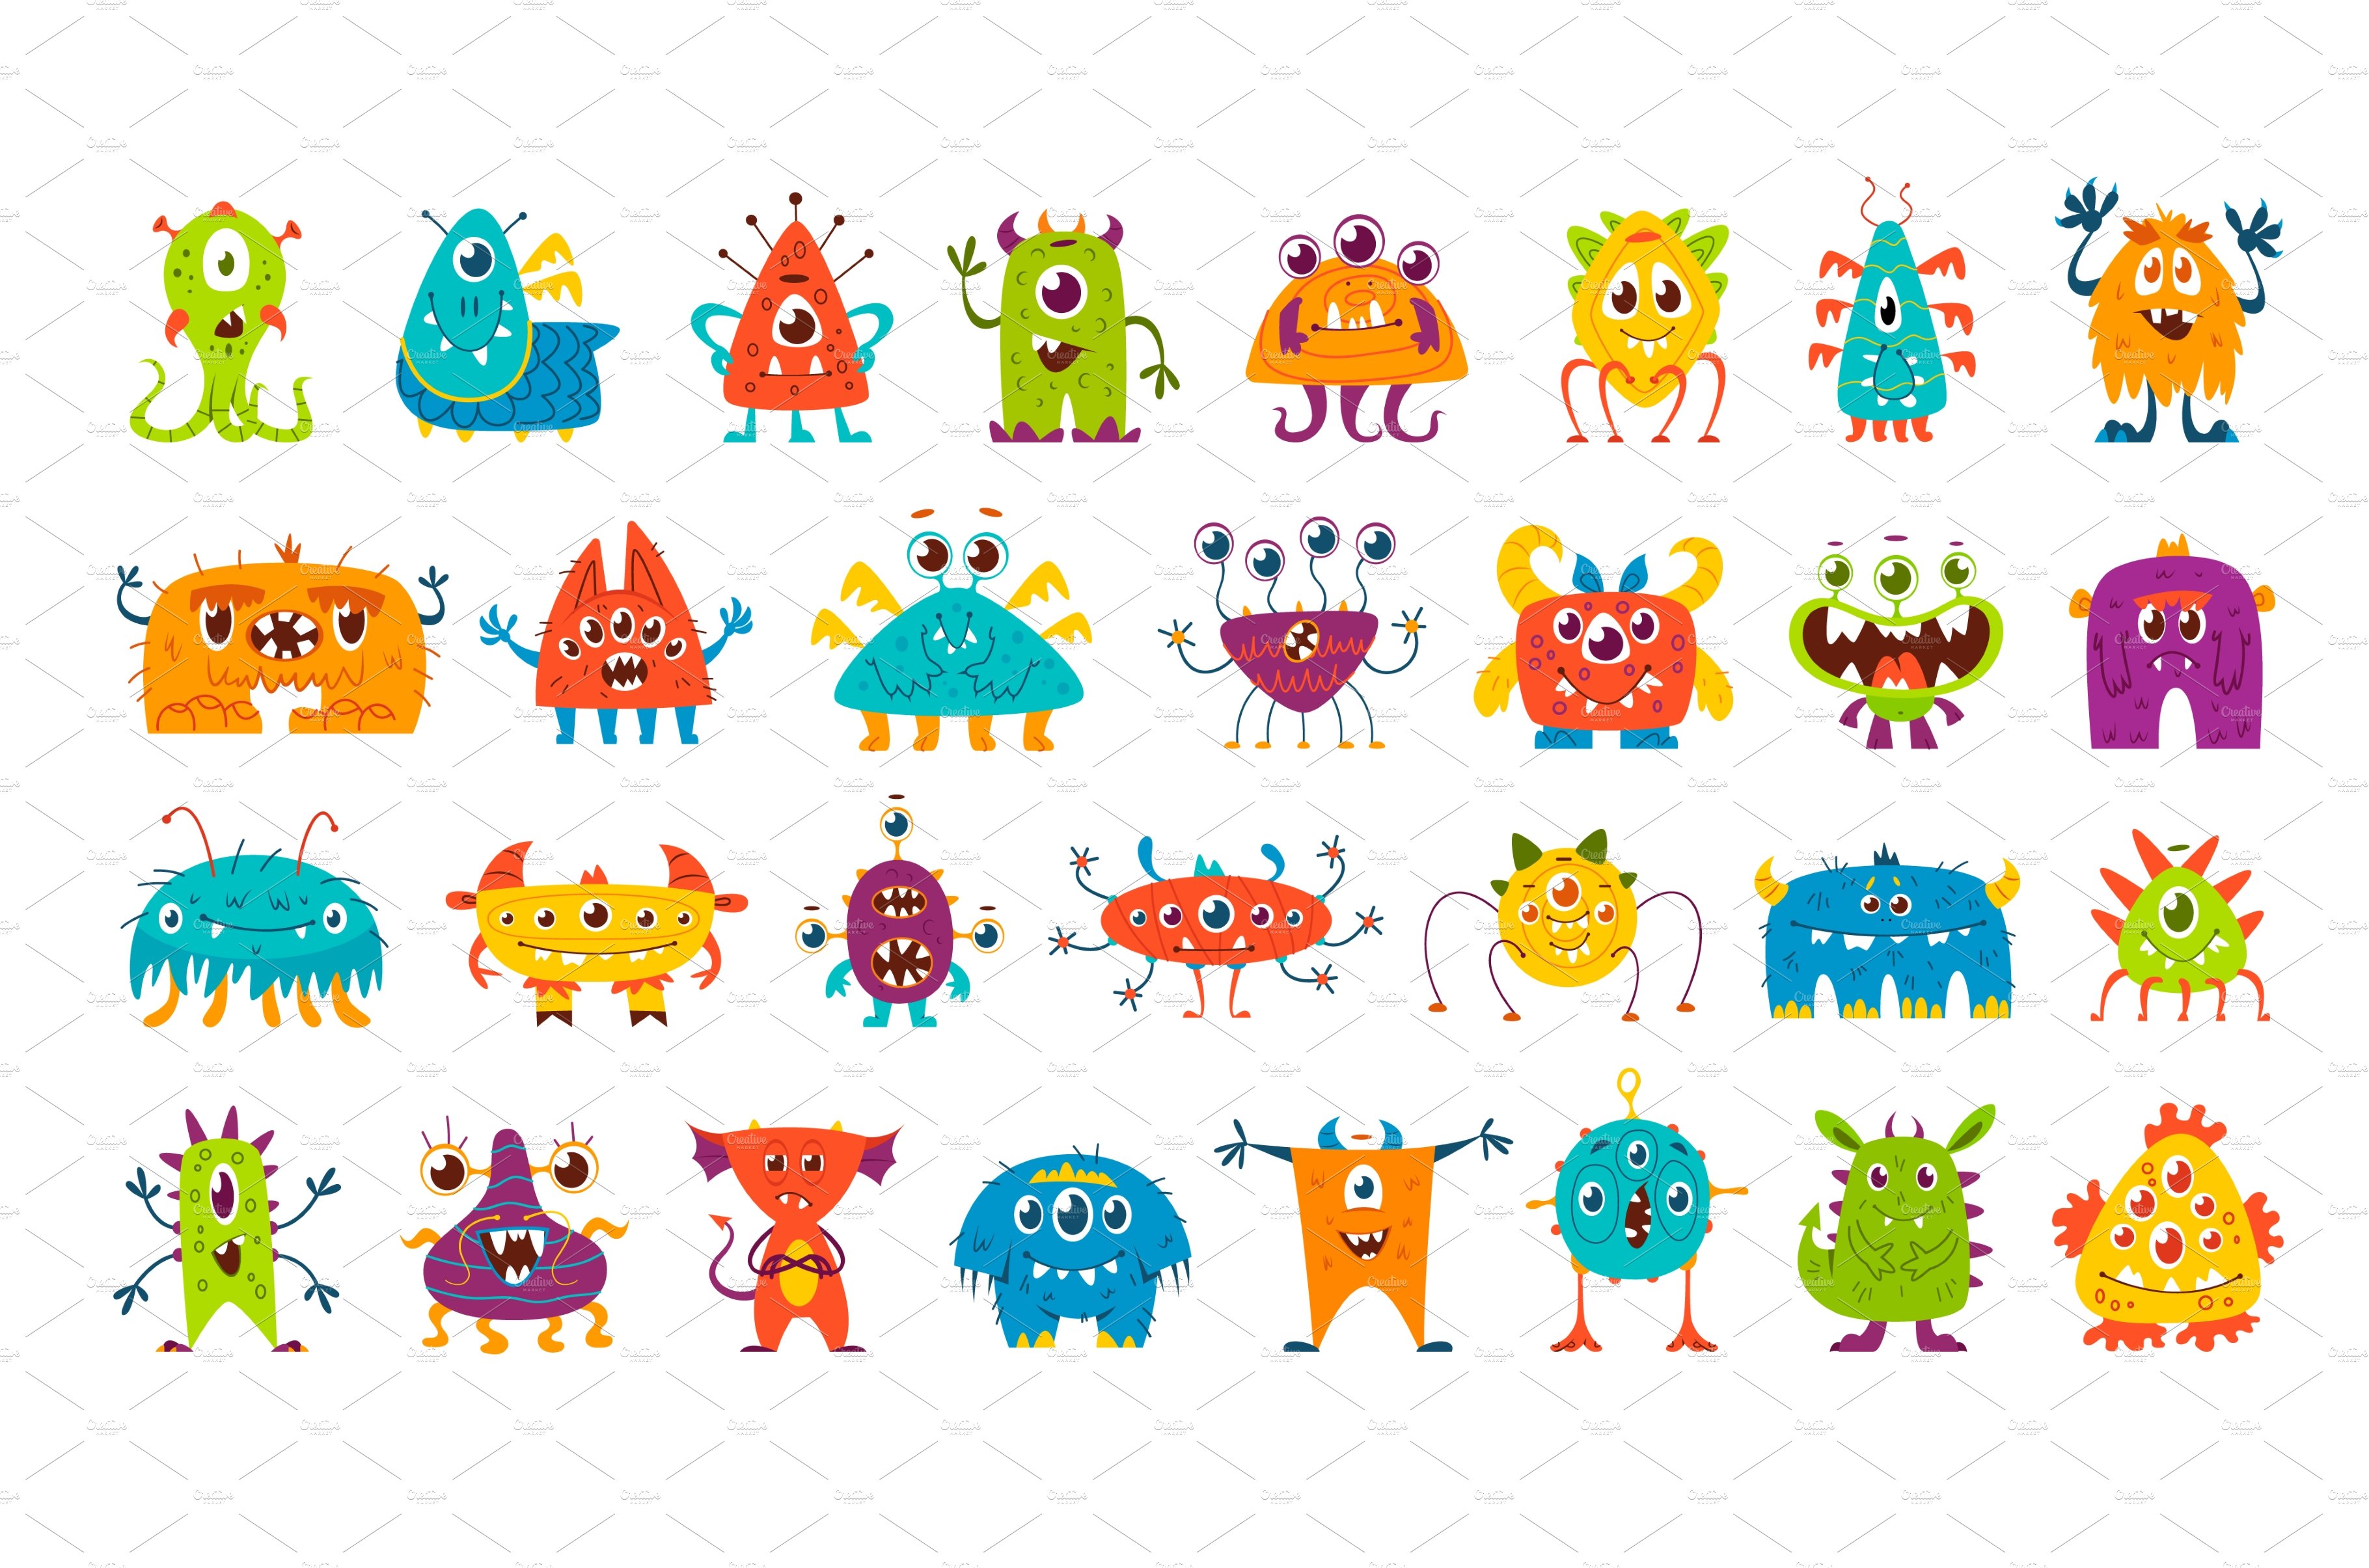 Cartoon monster characters cover image.